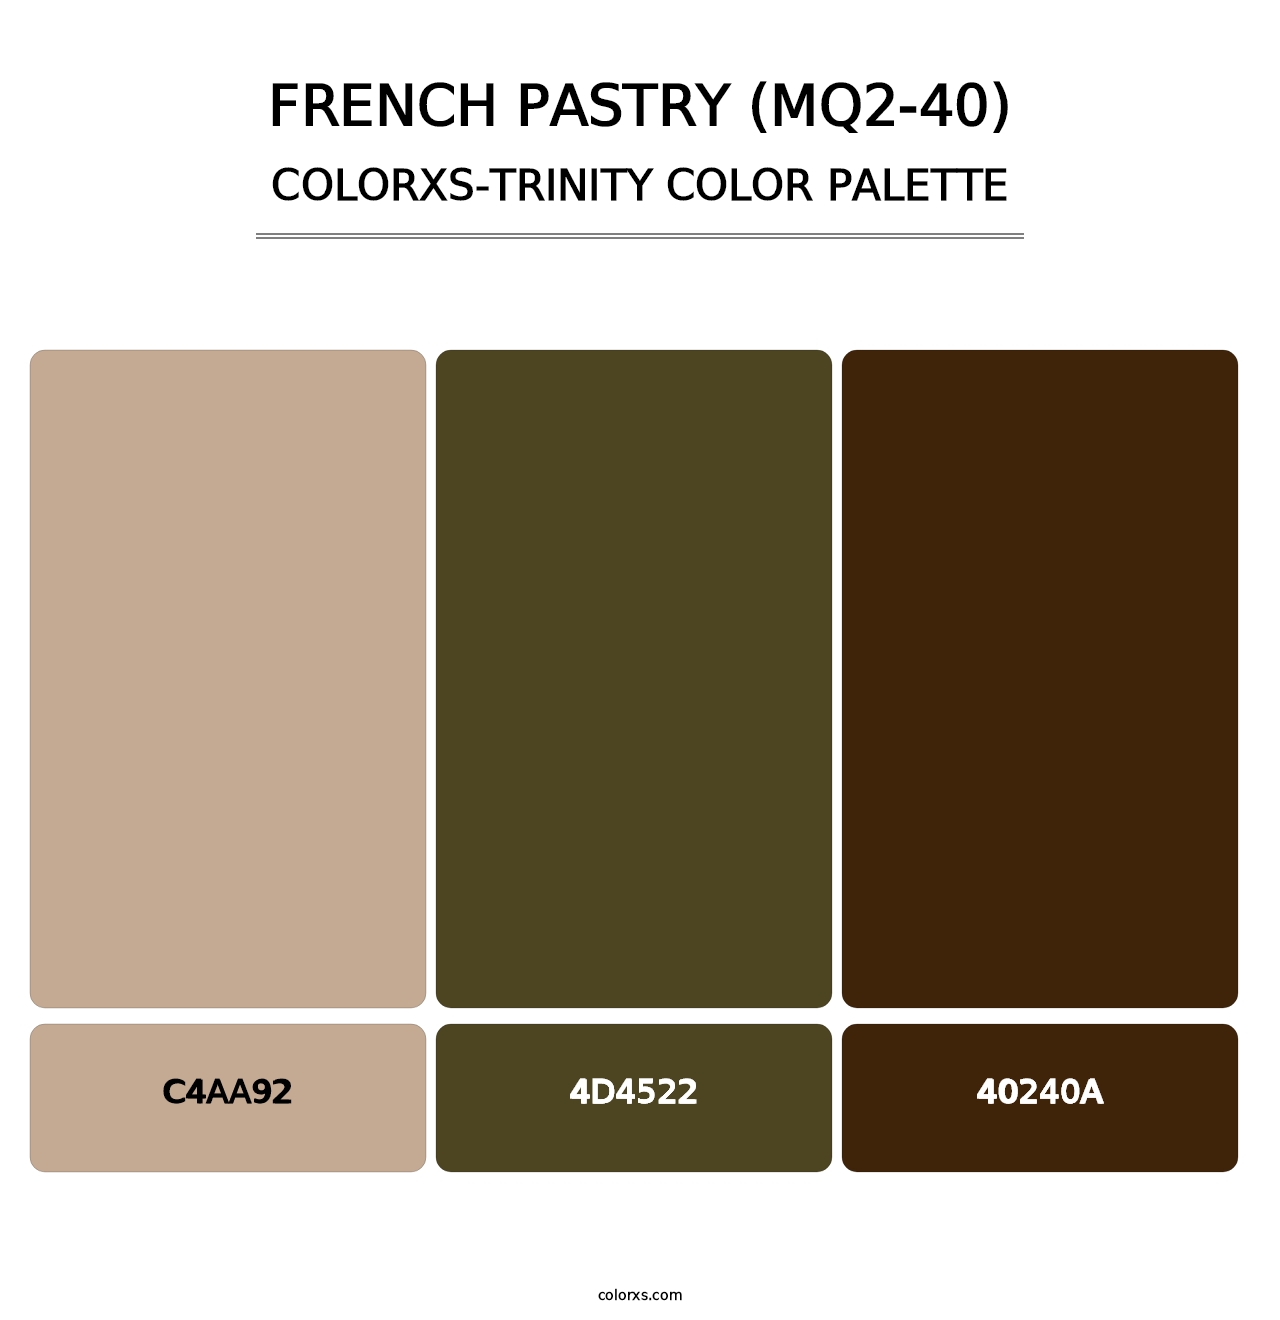 French Pastry (MQ2-40) - Colorxs Trinity Palette